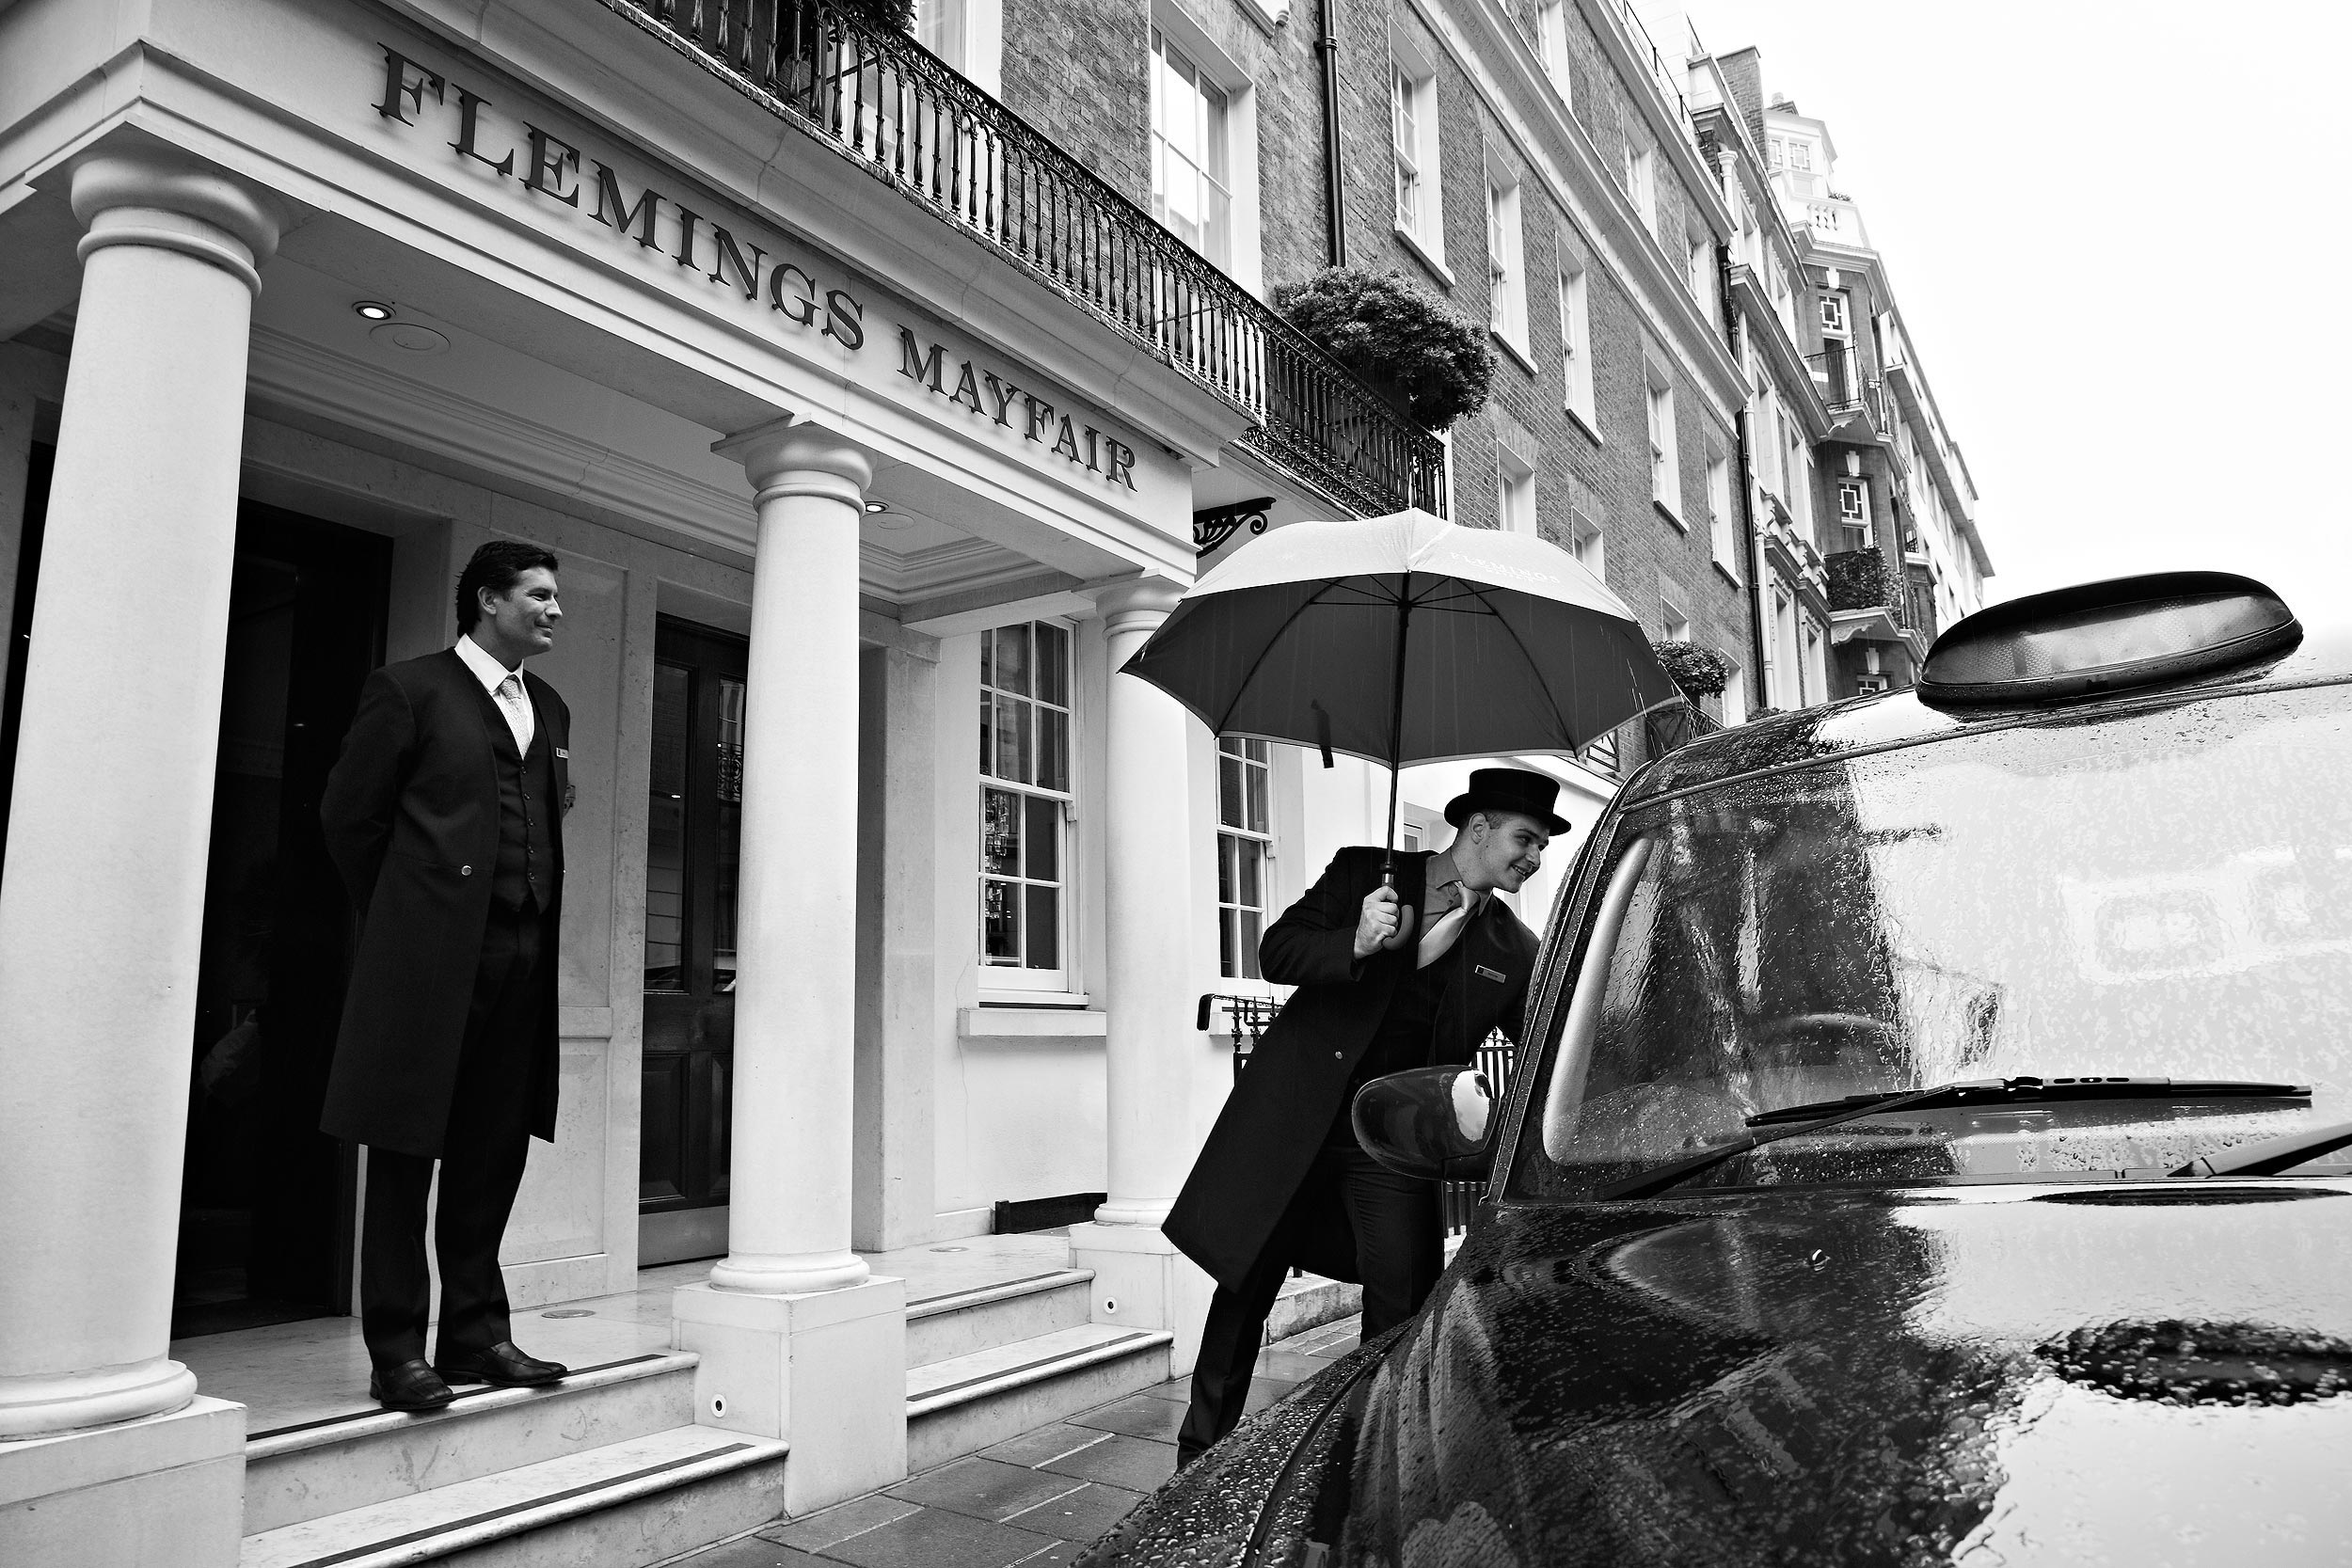 Arrival at Flemings Mayfair hotel, London.  Boutique hotel photography by Mike Caldwell 